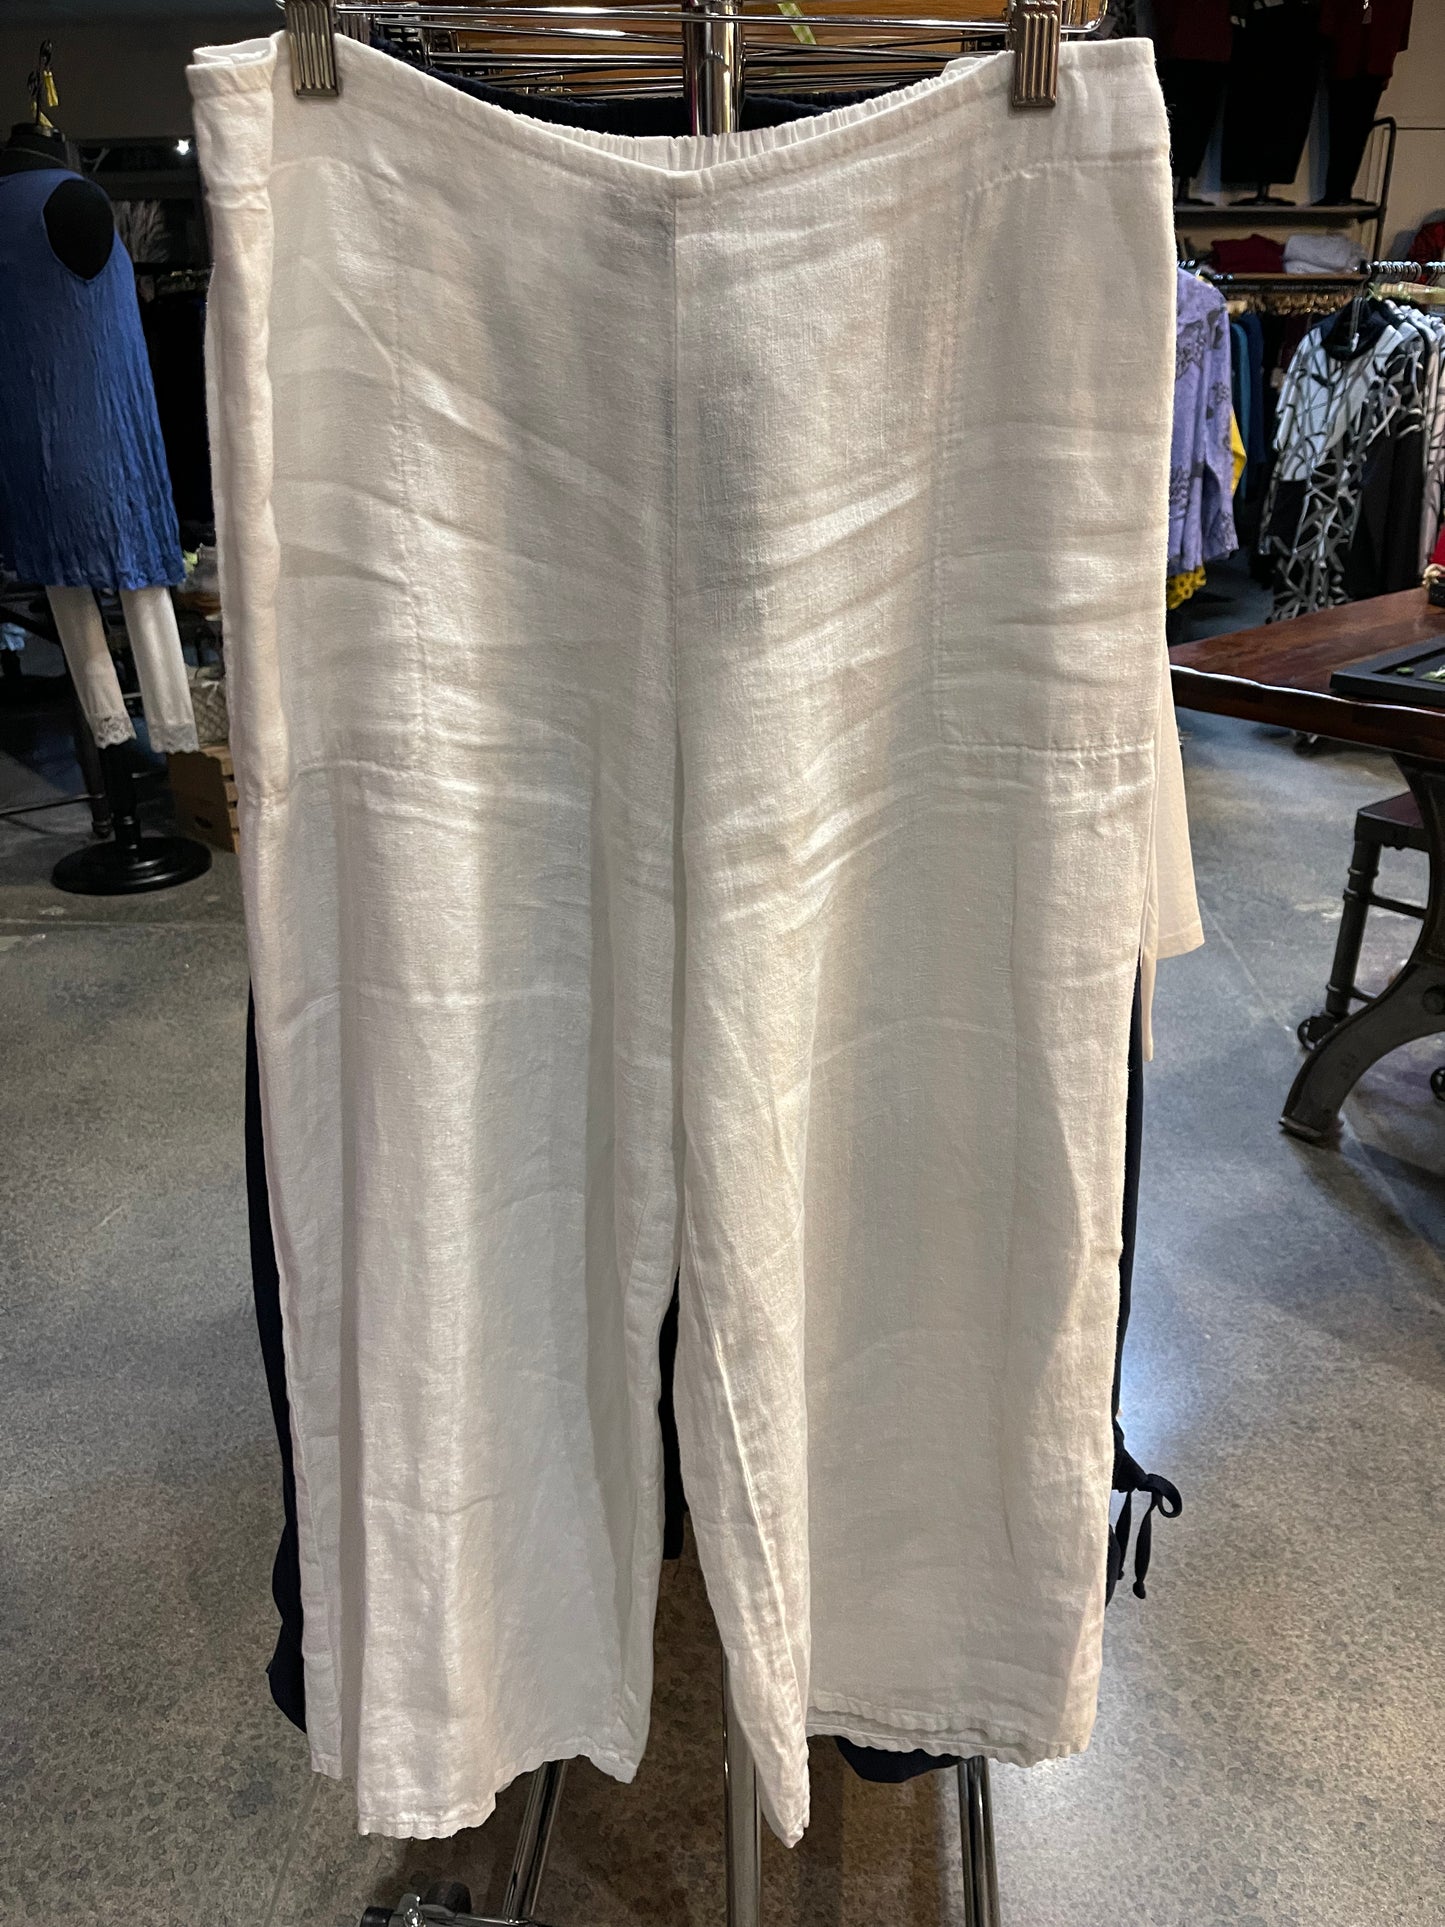 White Linen Flat Front Crop Pant with Adjustable Waist